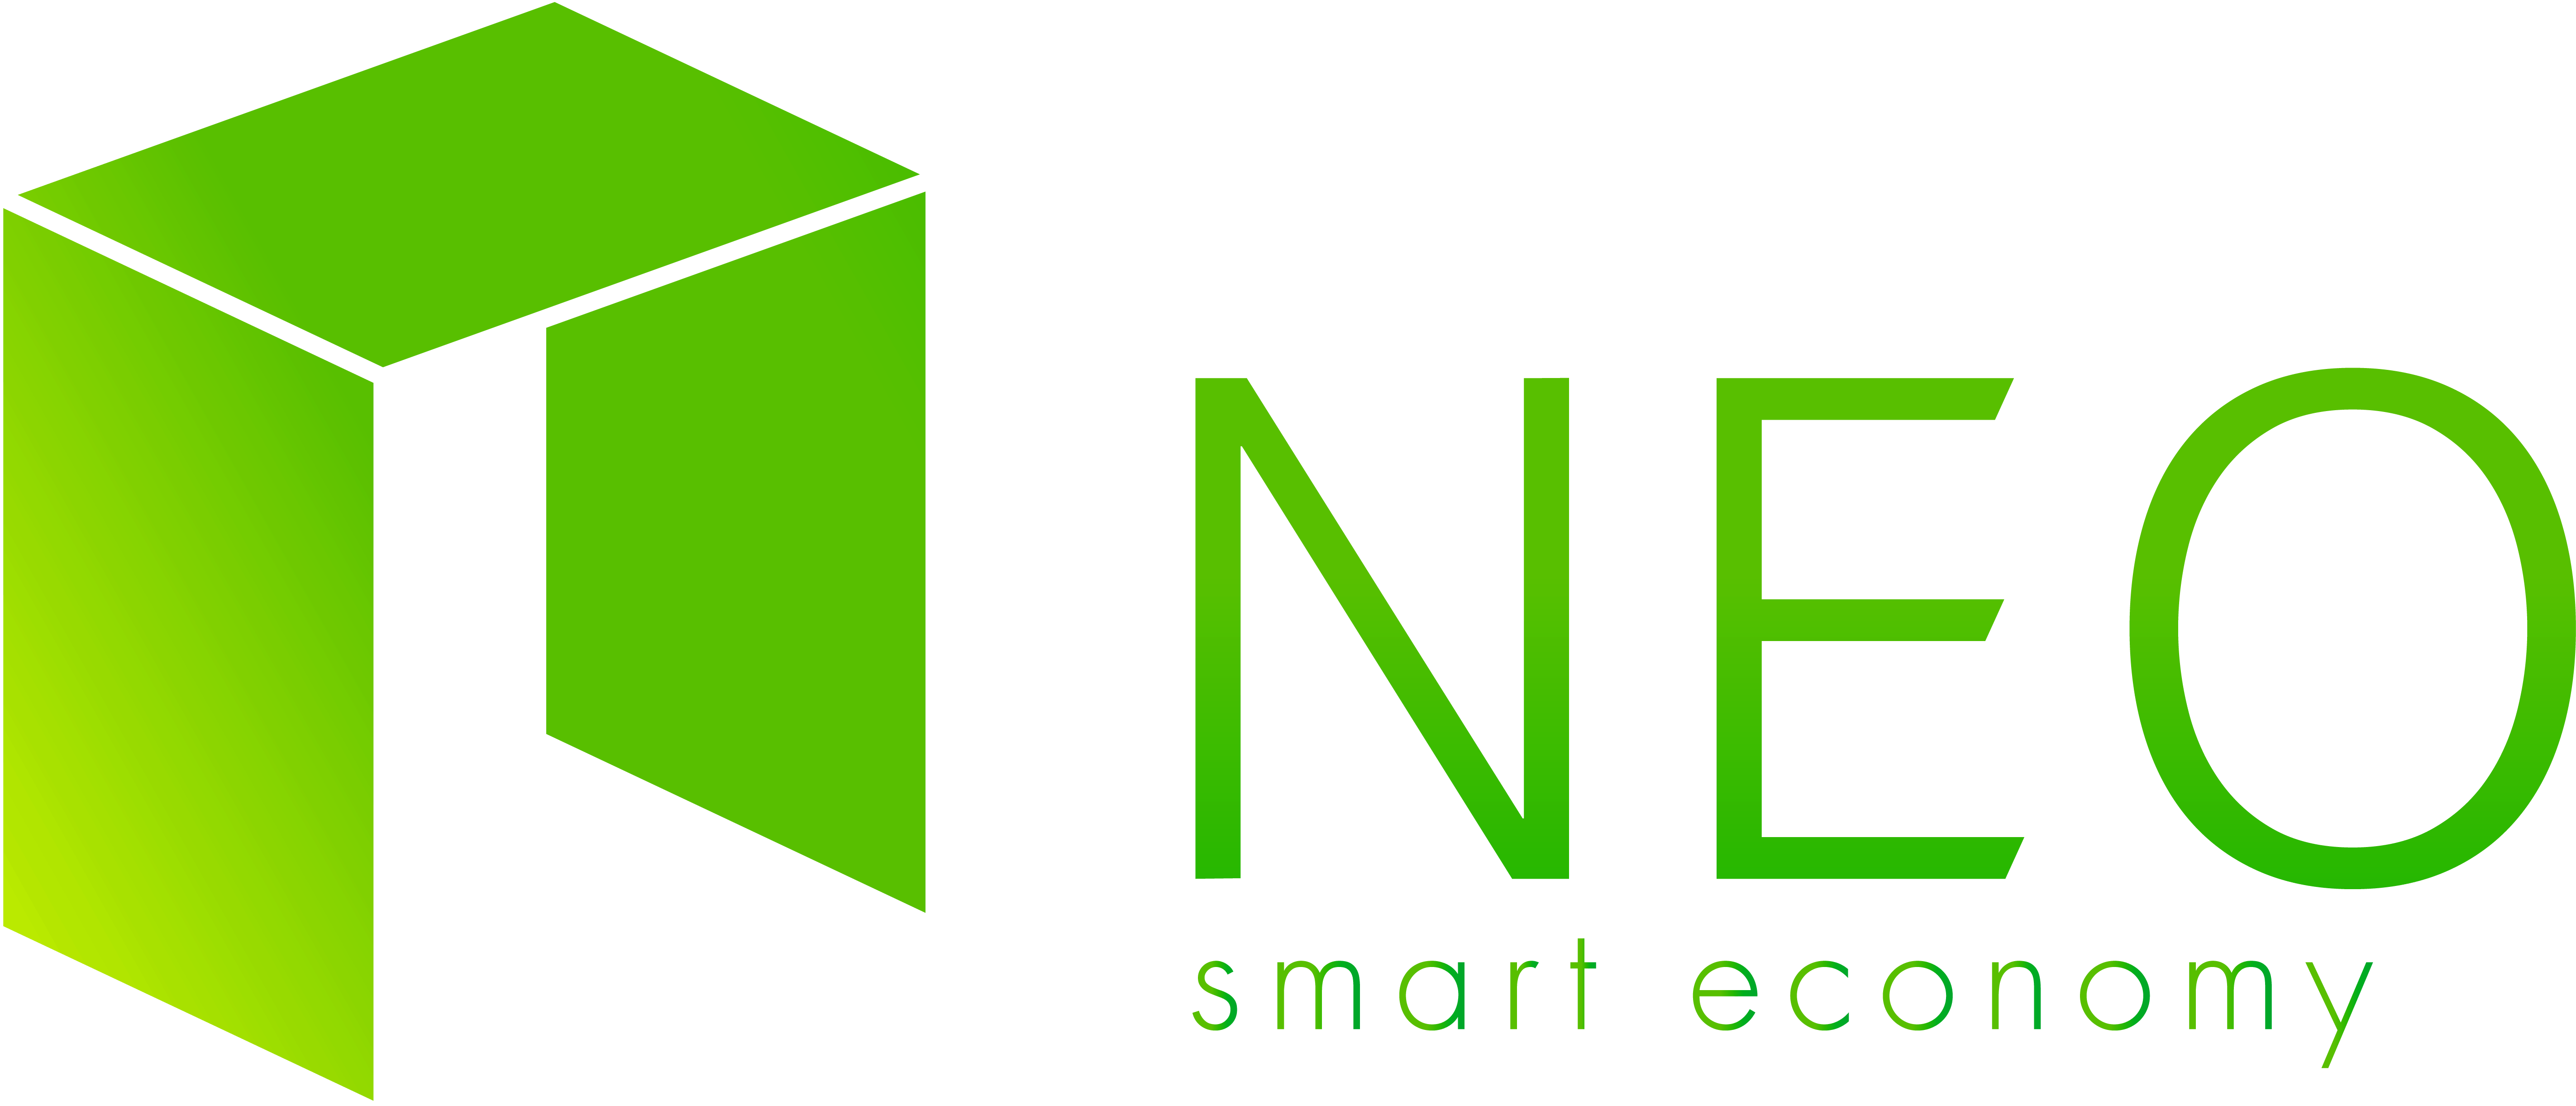 Neo Crypto Logo PNG -Datei